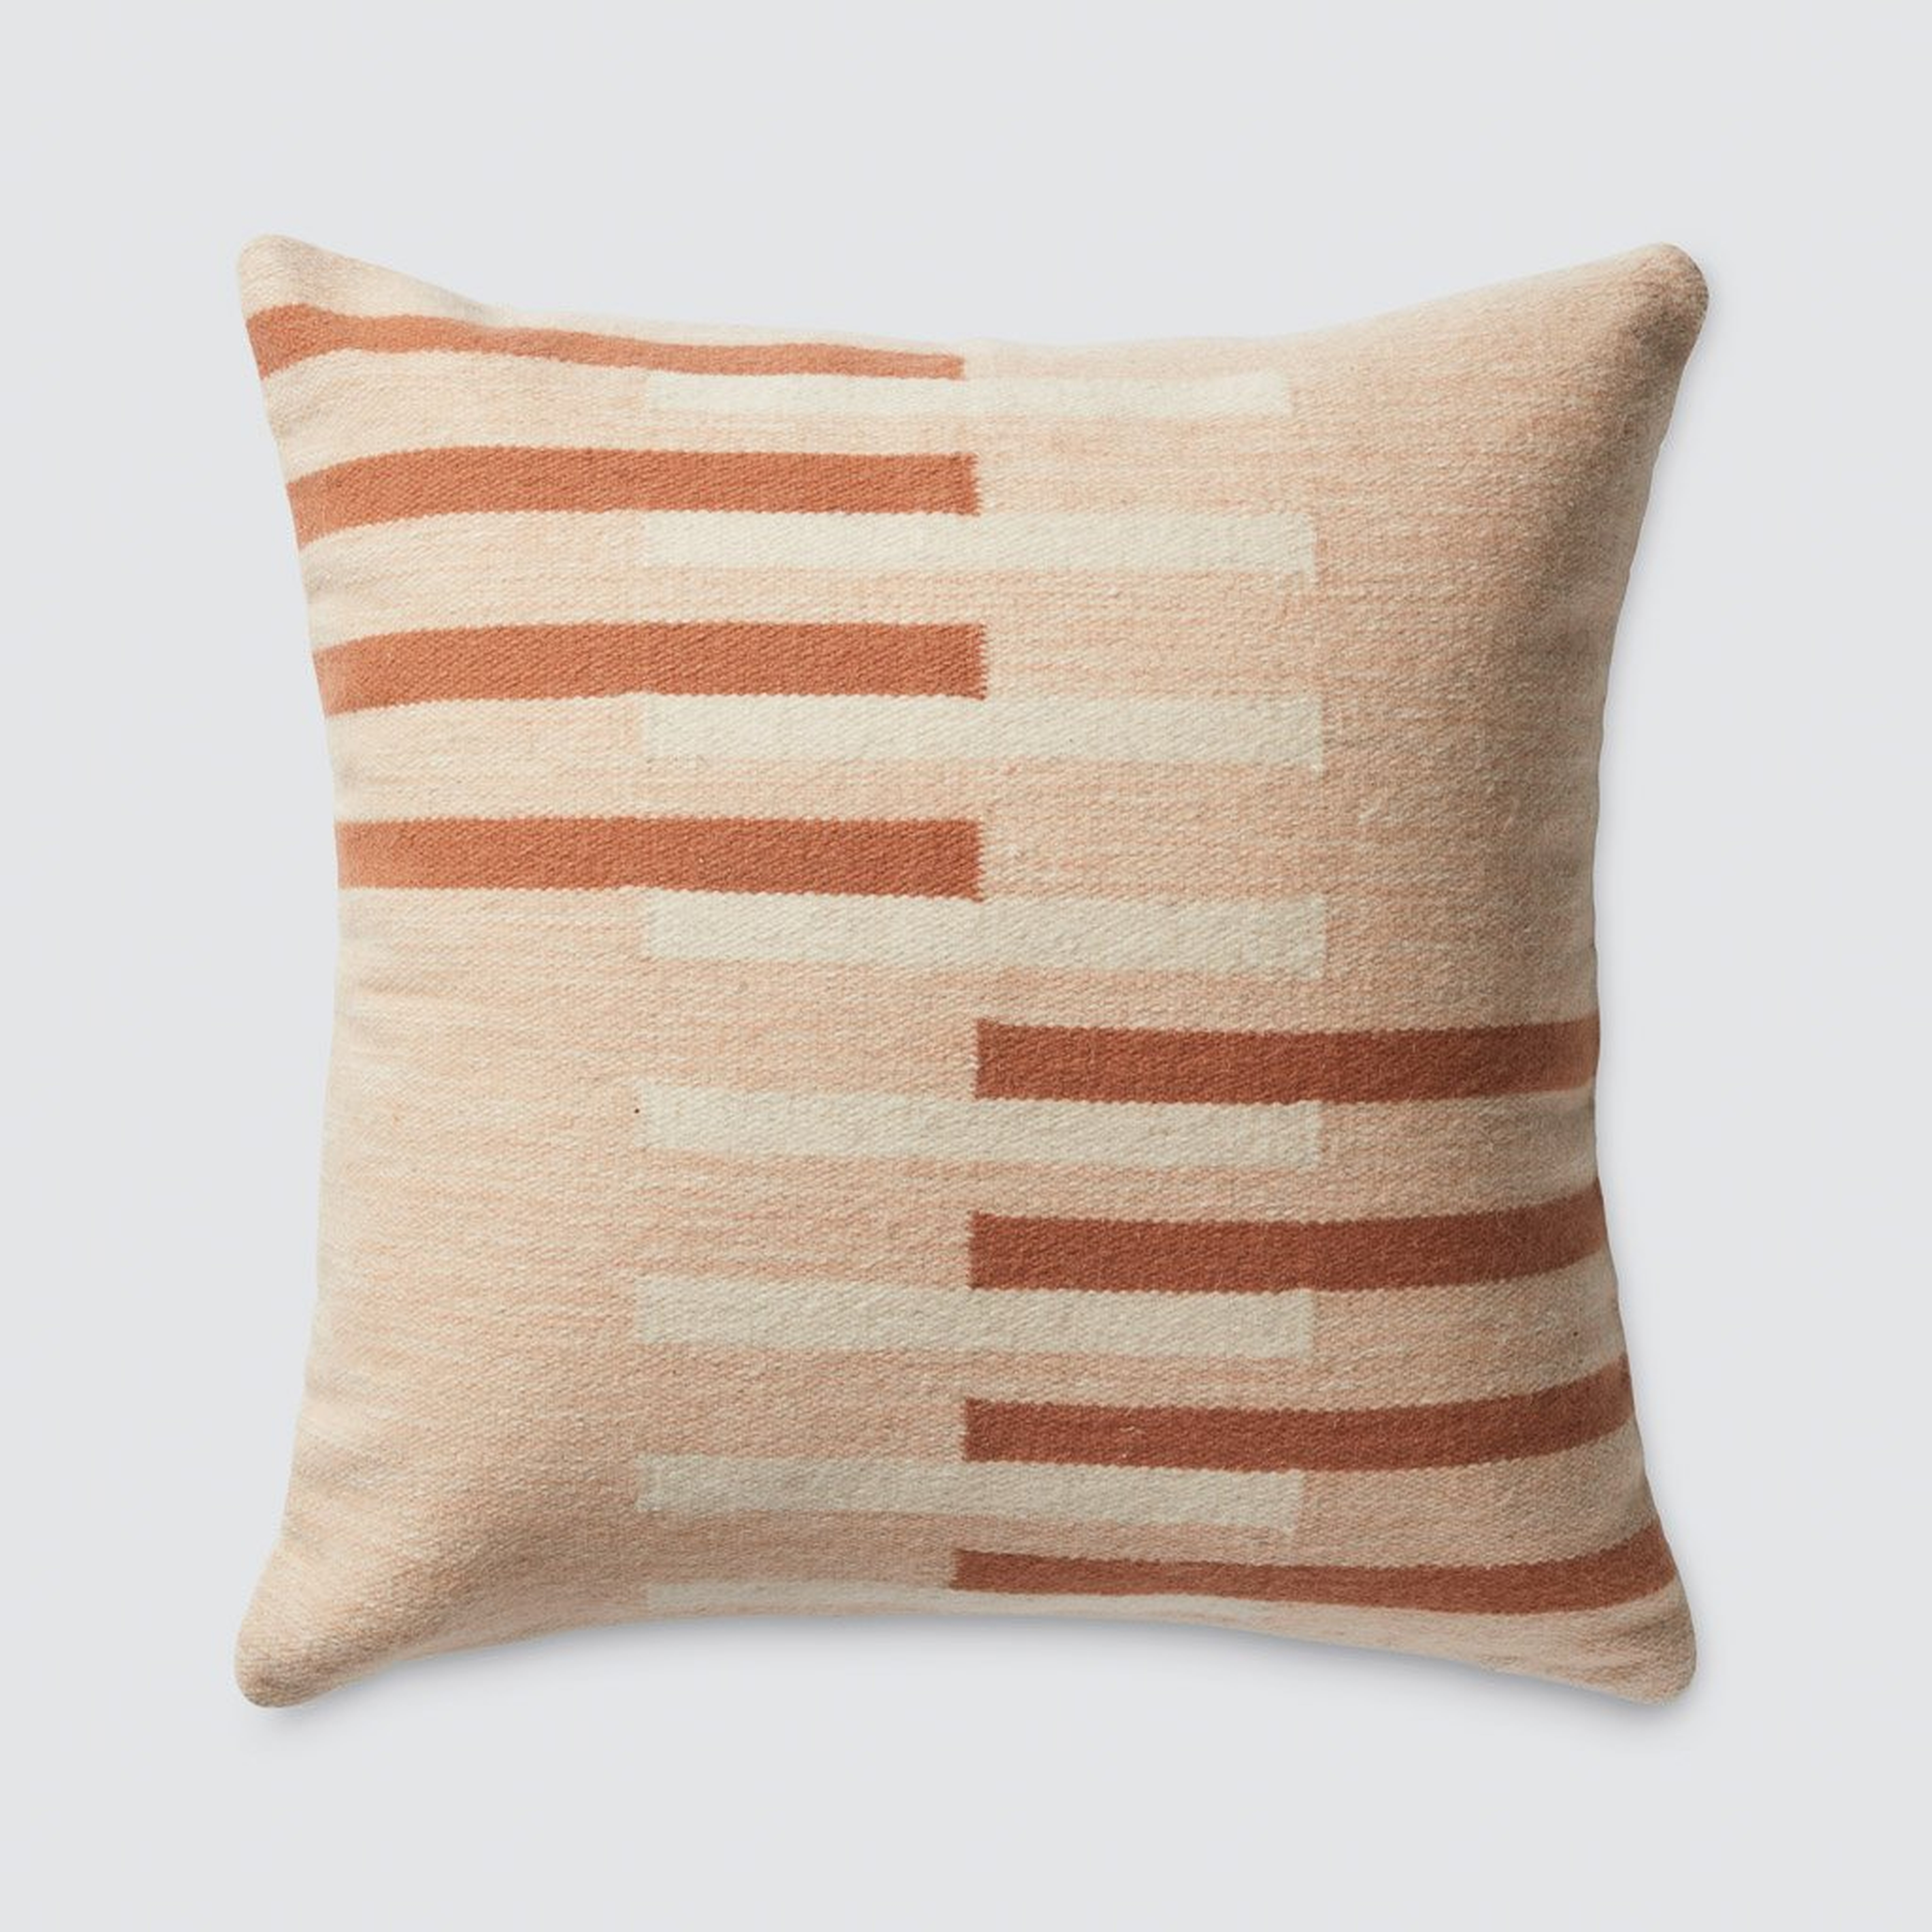 Linda Pillow By The Citizenry - The Citizenry